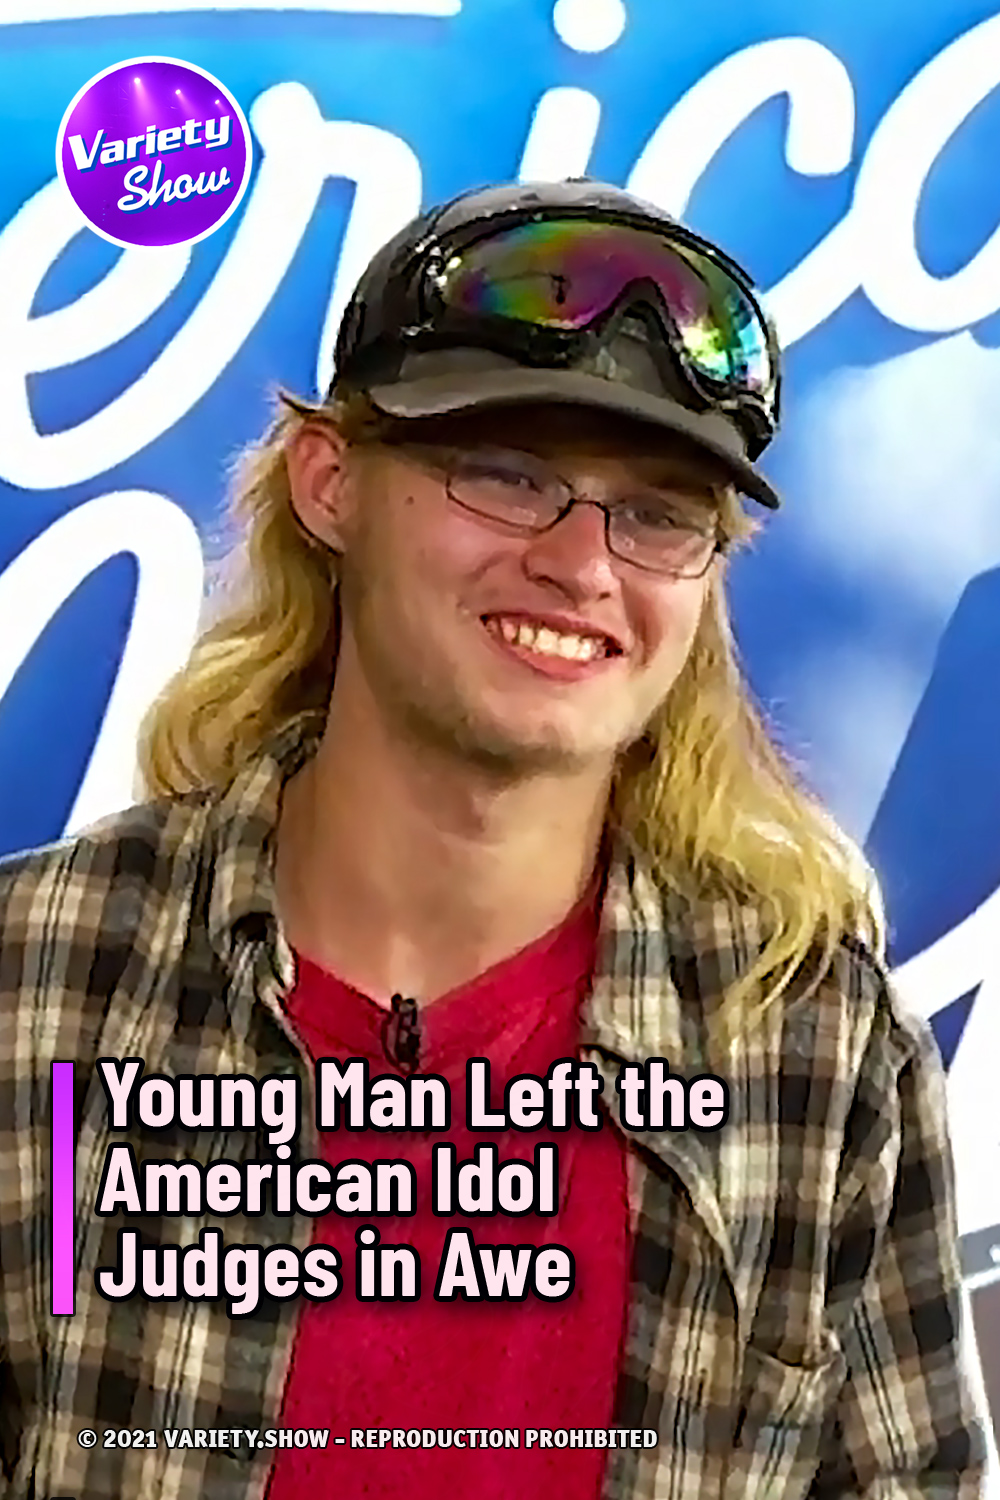 Young Man Left the American Idol Judges in Awe